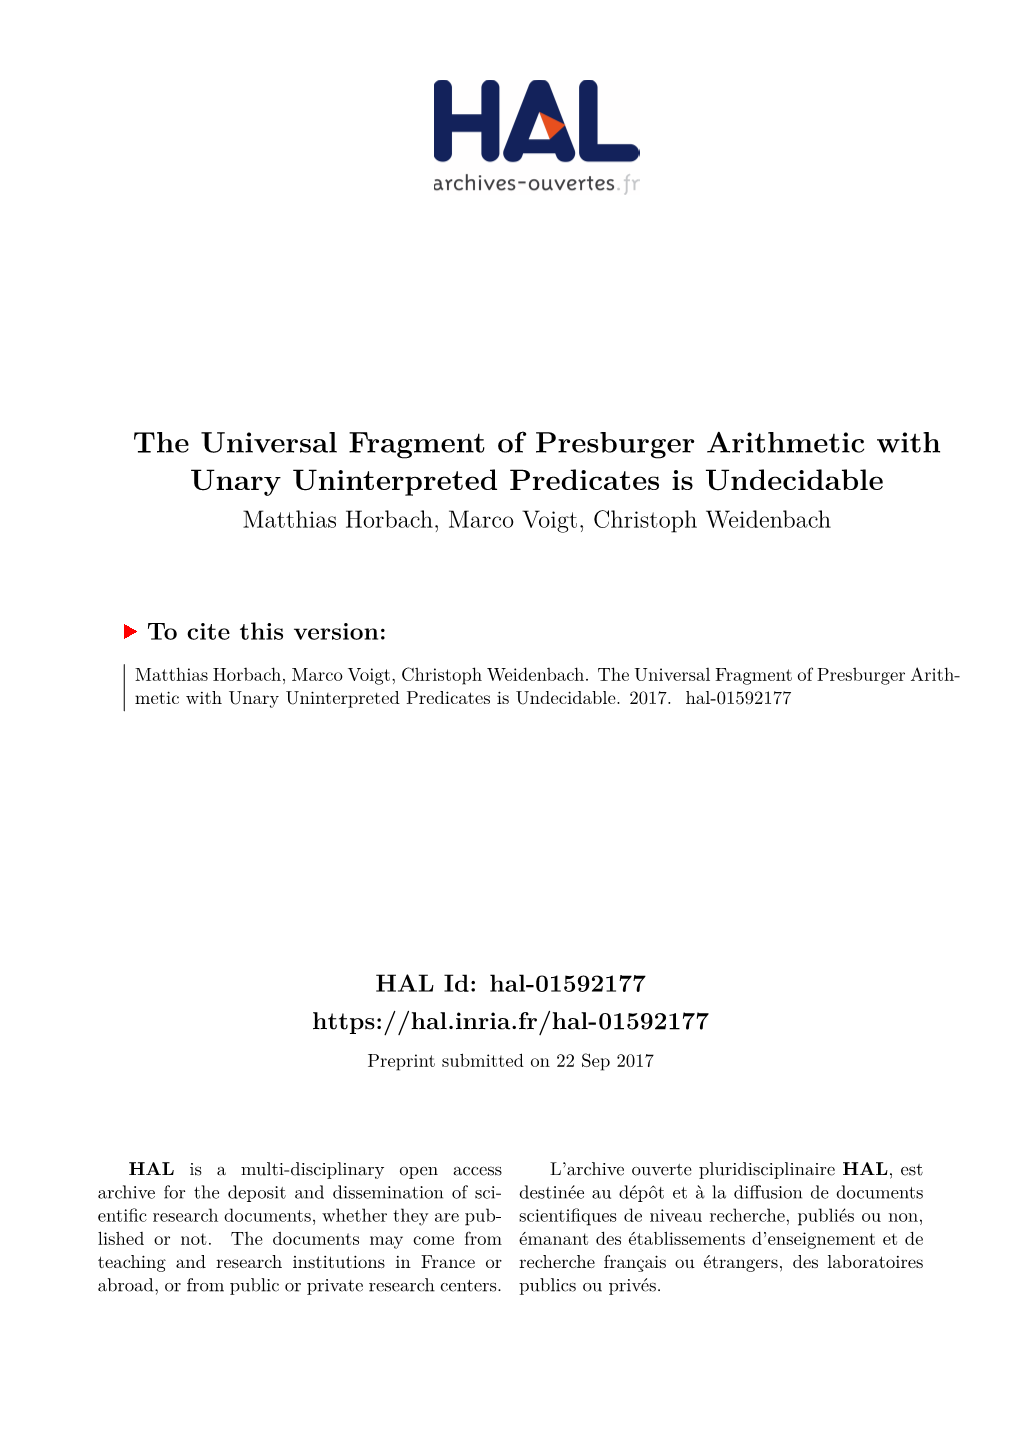 The Universal Fragment of Presburger Arithmetic with Unary Uninterpreted Predicates Is Undecidable Matthias Horbach, Marco Voigt, Christoph Weidenbach